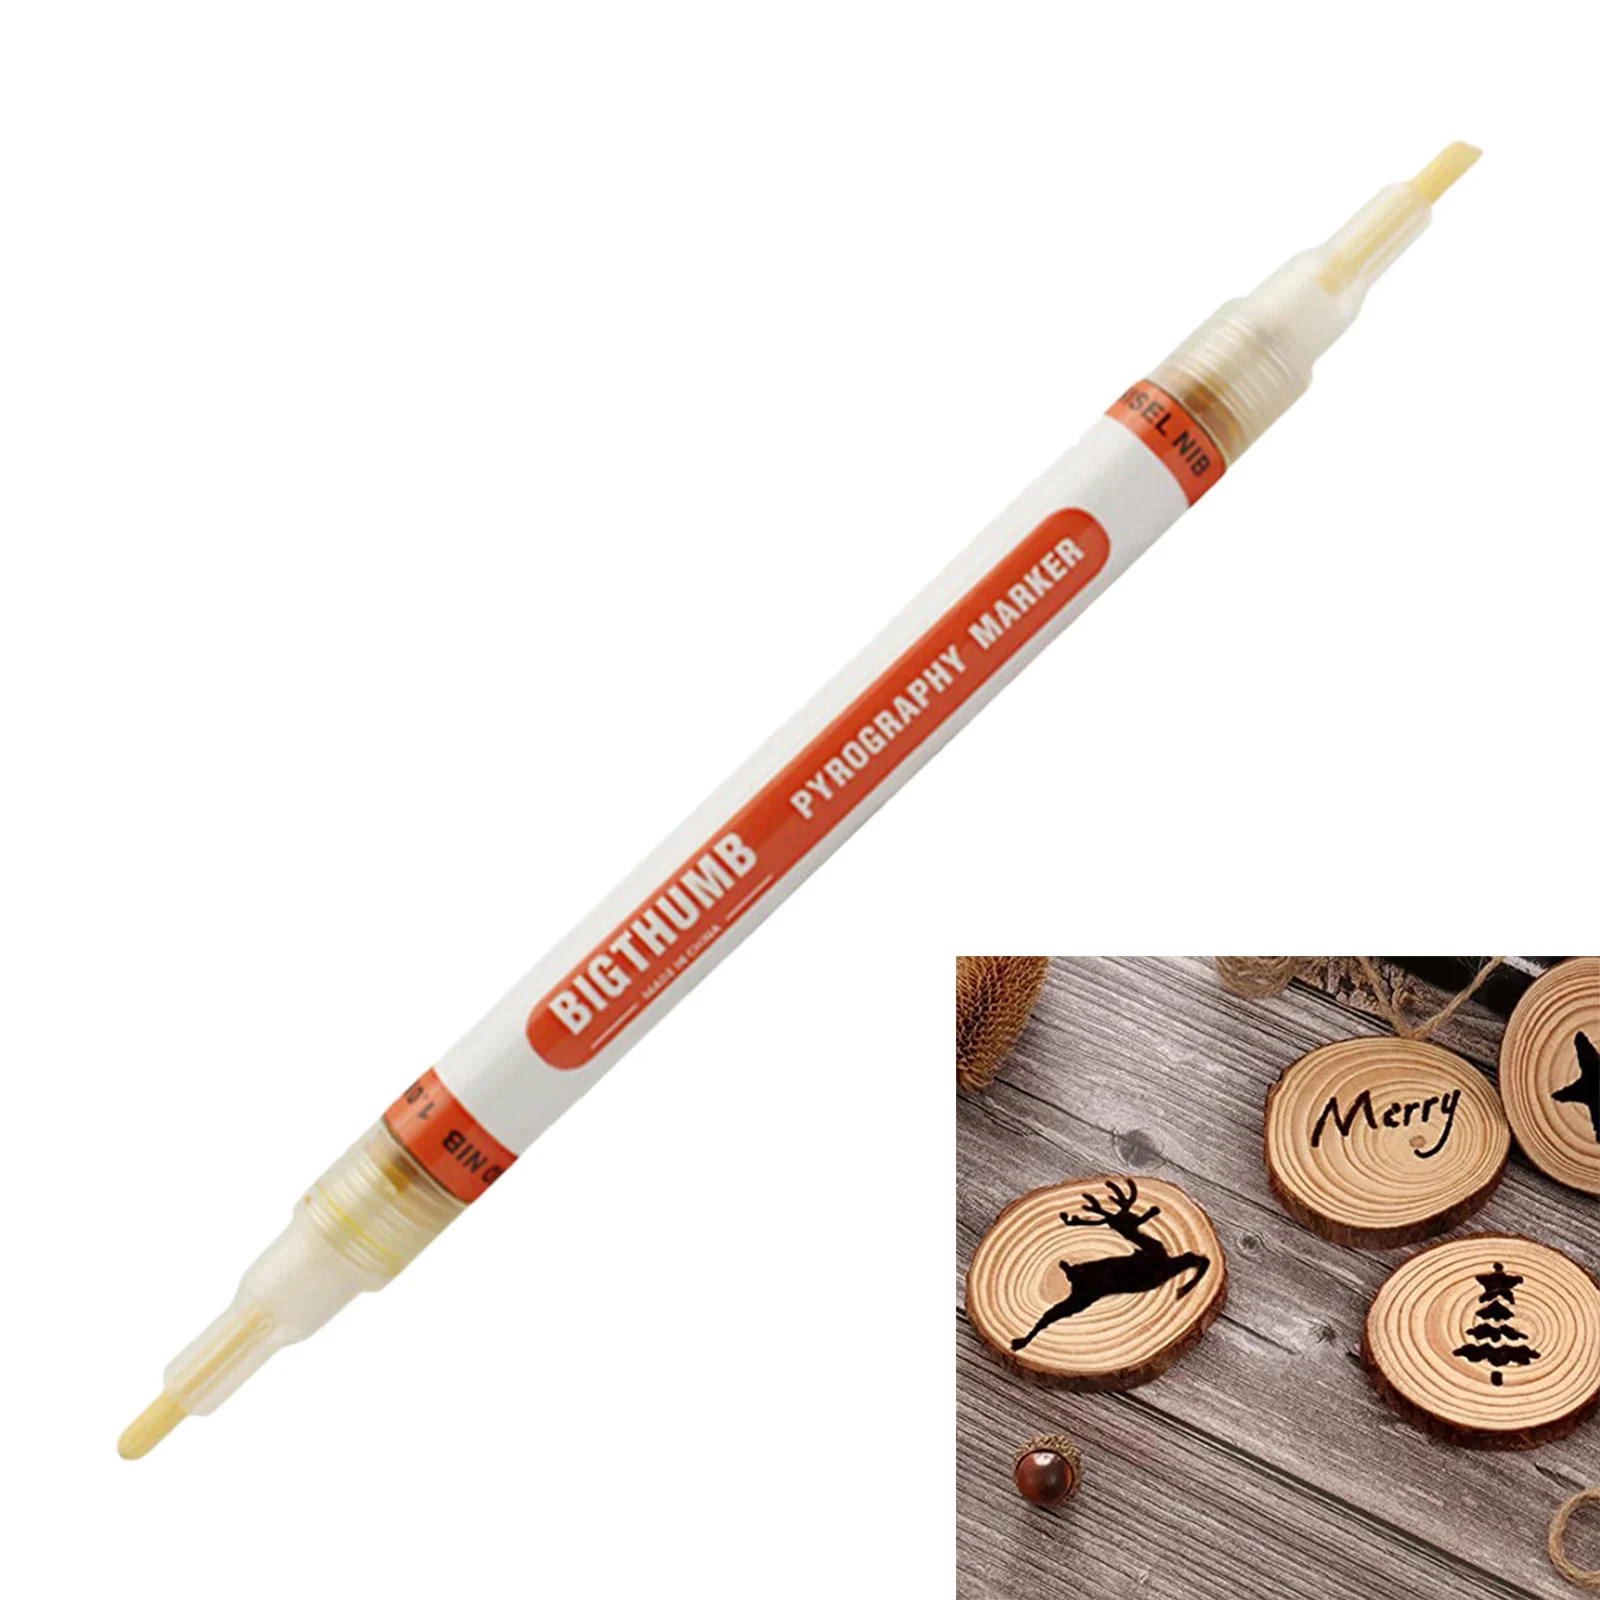 Wood Burning Pen Double Head Marker Scorch Pen Maker DIY Wood Painting Replace Wood Burning Iron Tool for Pyrography Woodworking